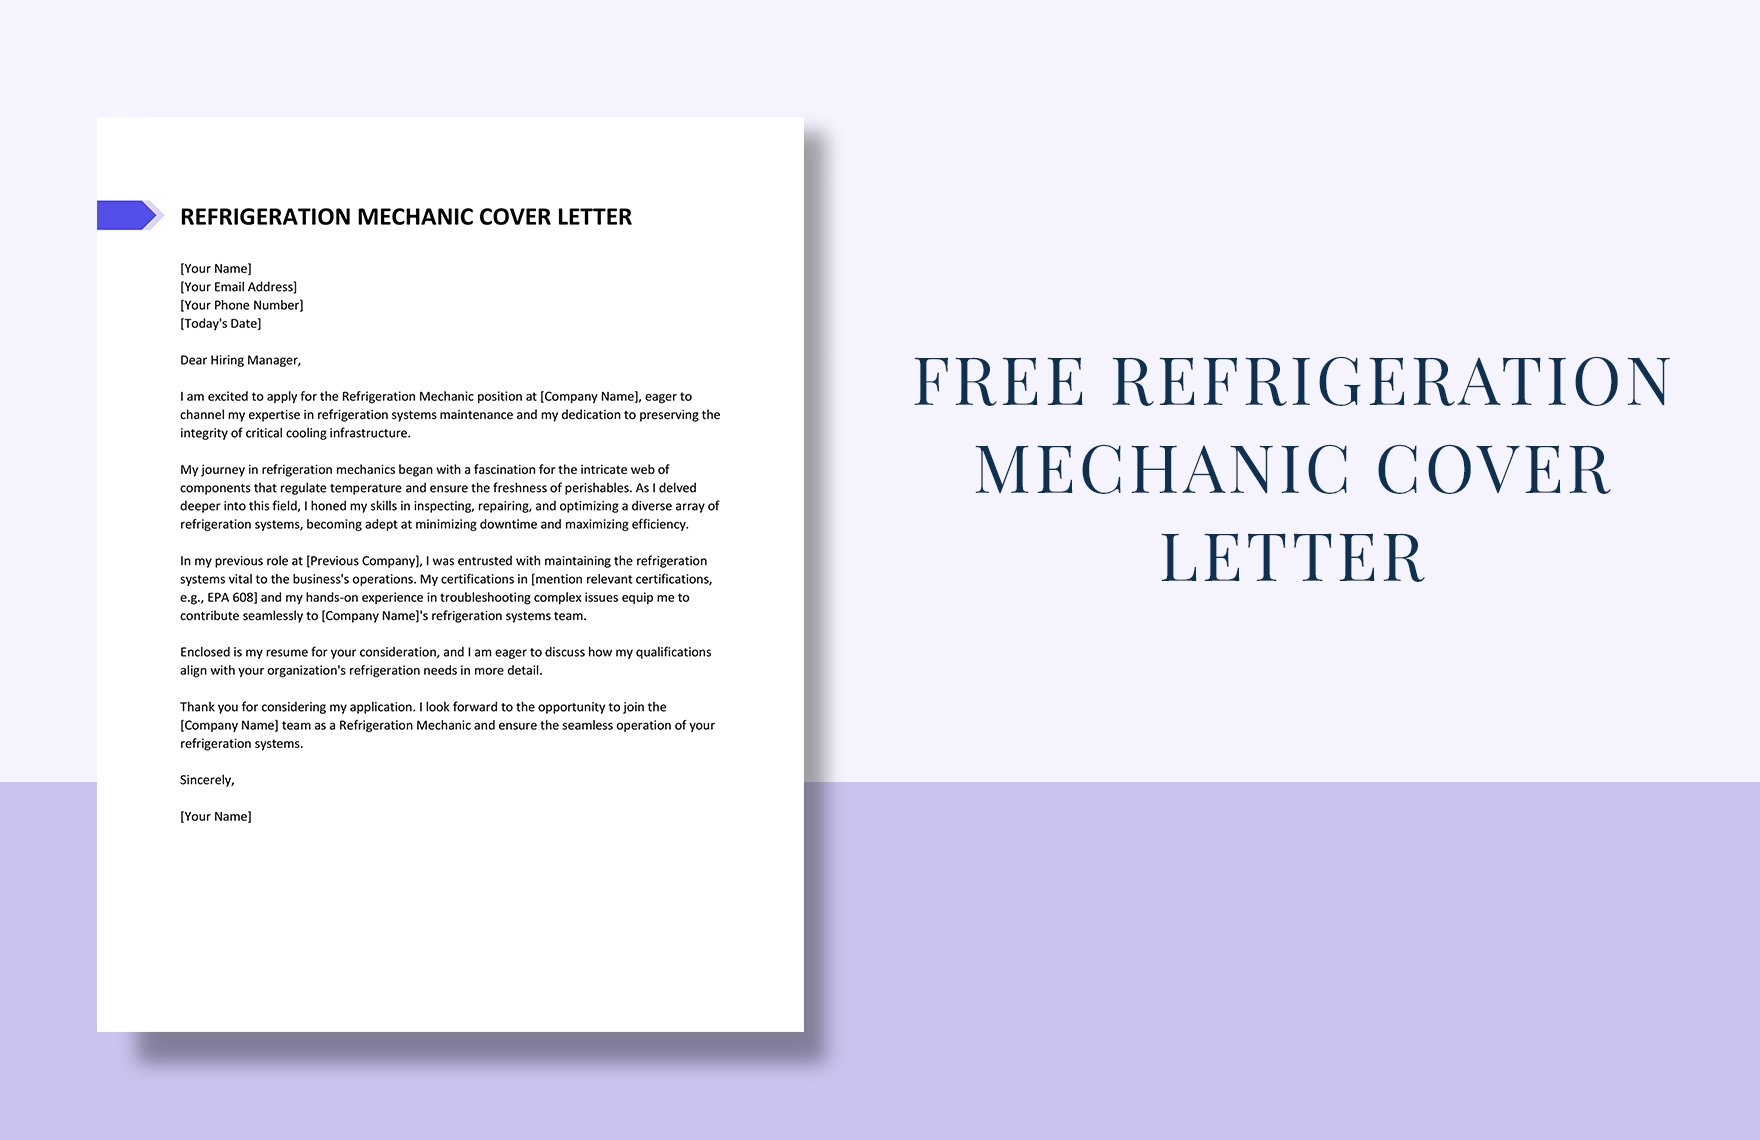 Refrigeration Mechanic Cover Letter in Word, Google Docs